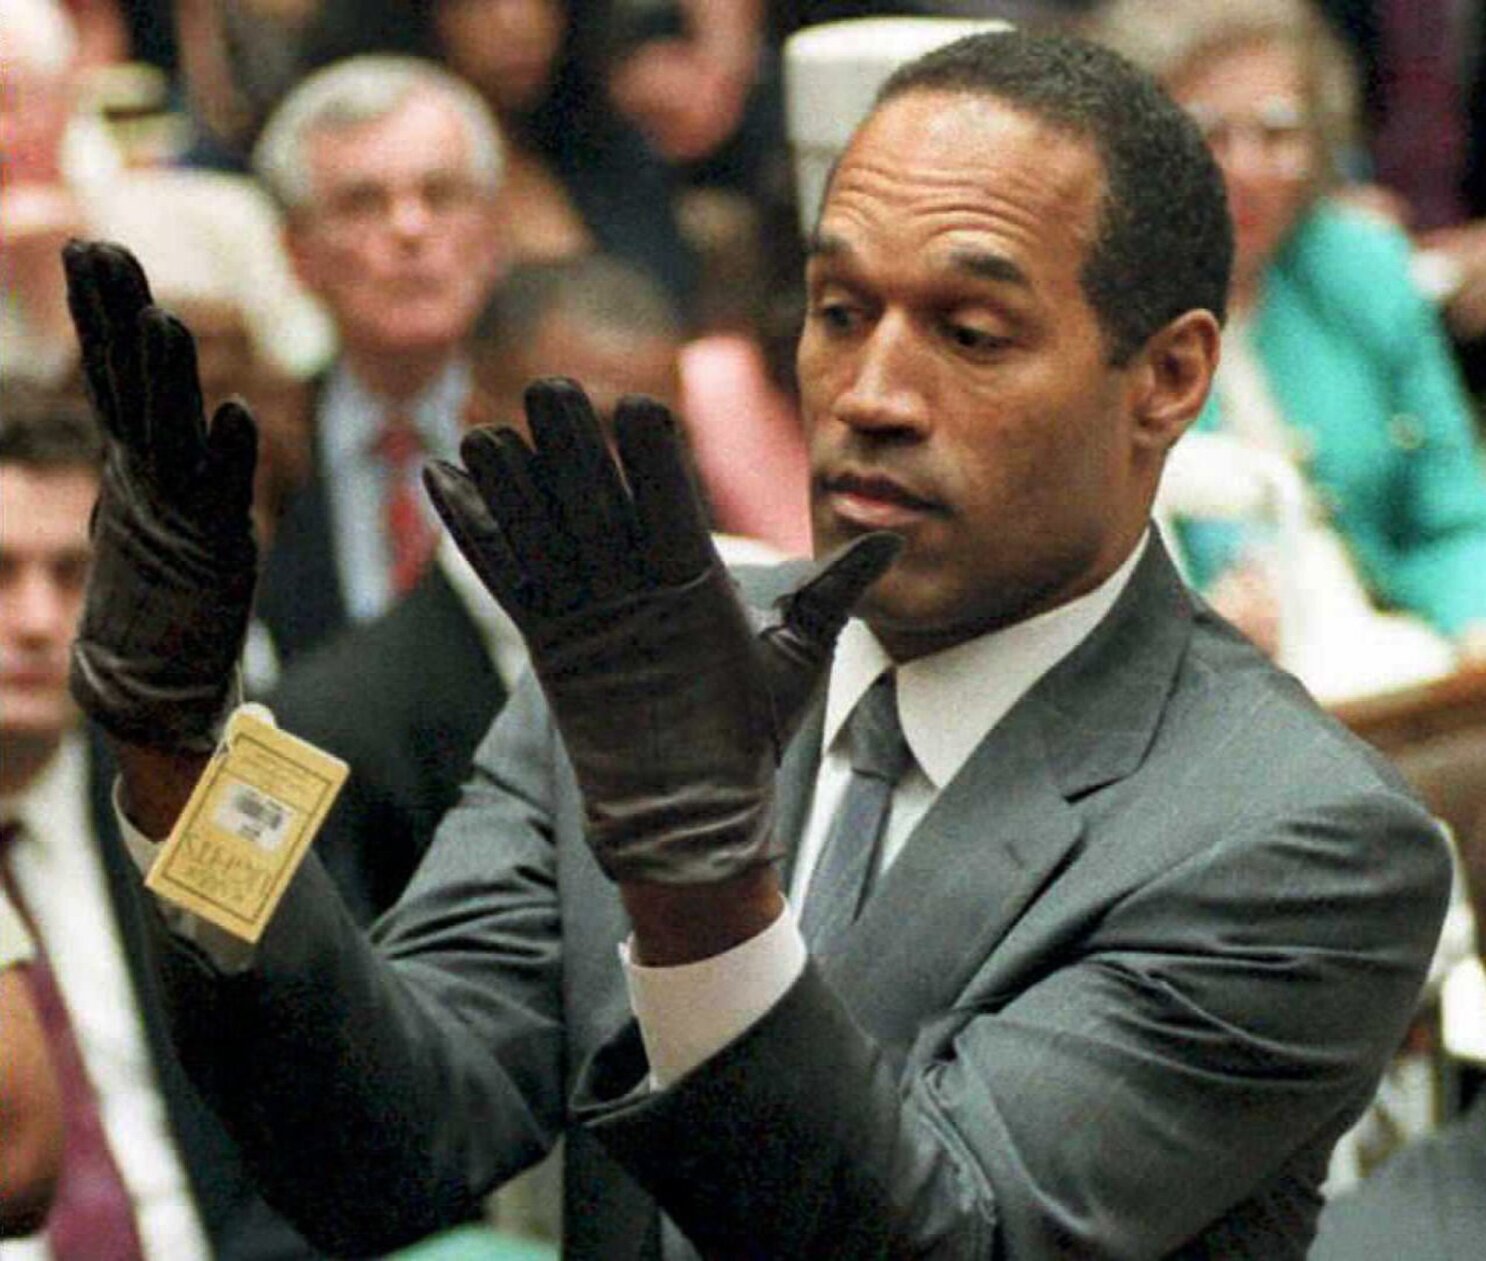 My God New Claims About O J Simpson And Bloody Glove Trouble Former District Attorney Los Angeles Times